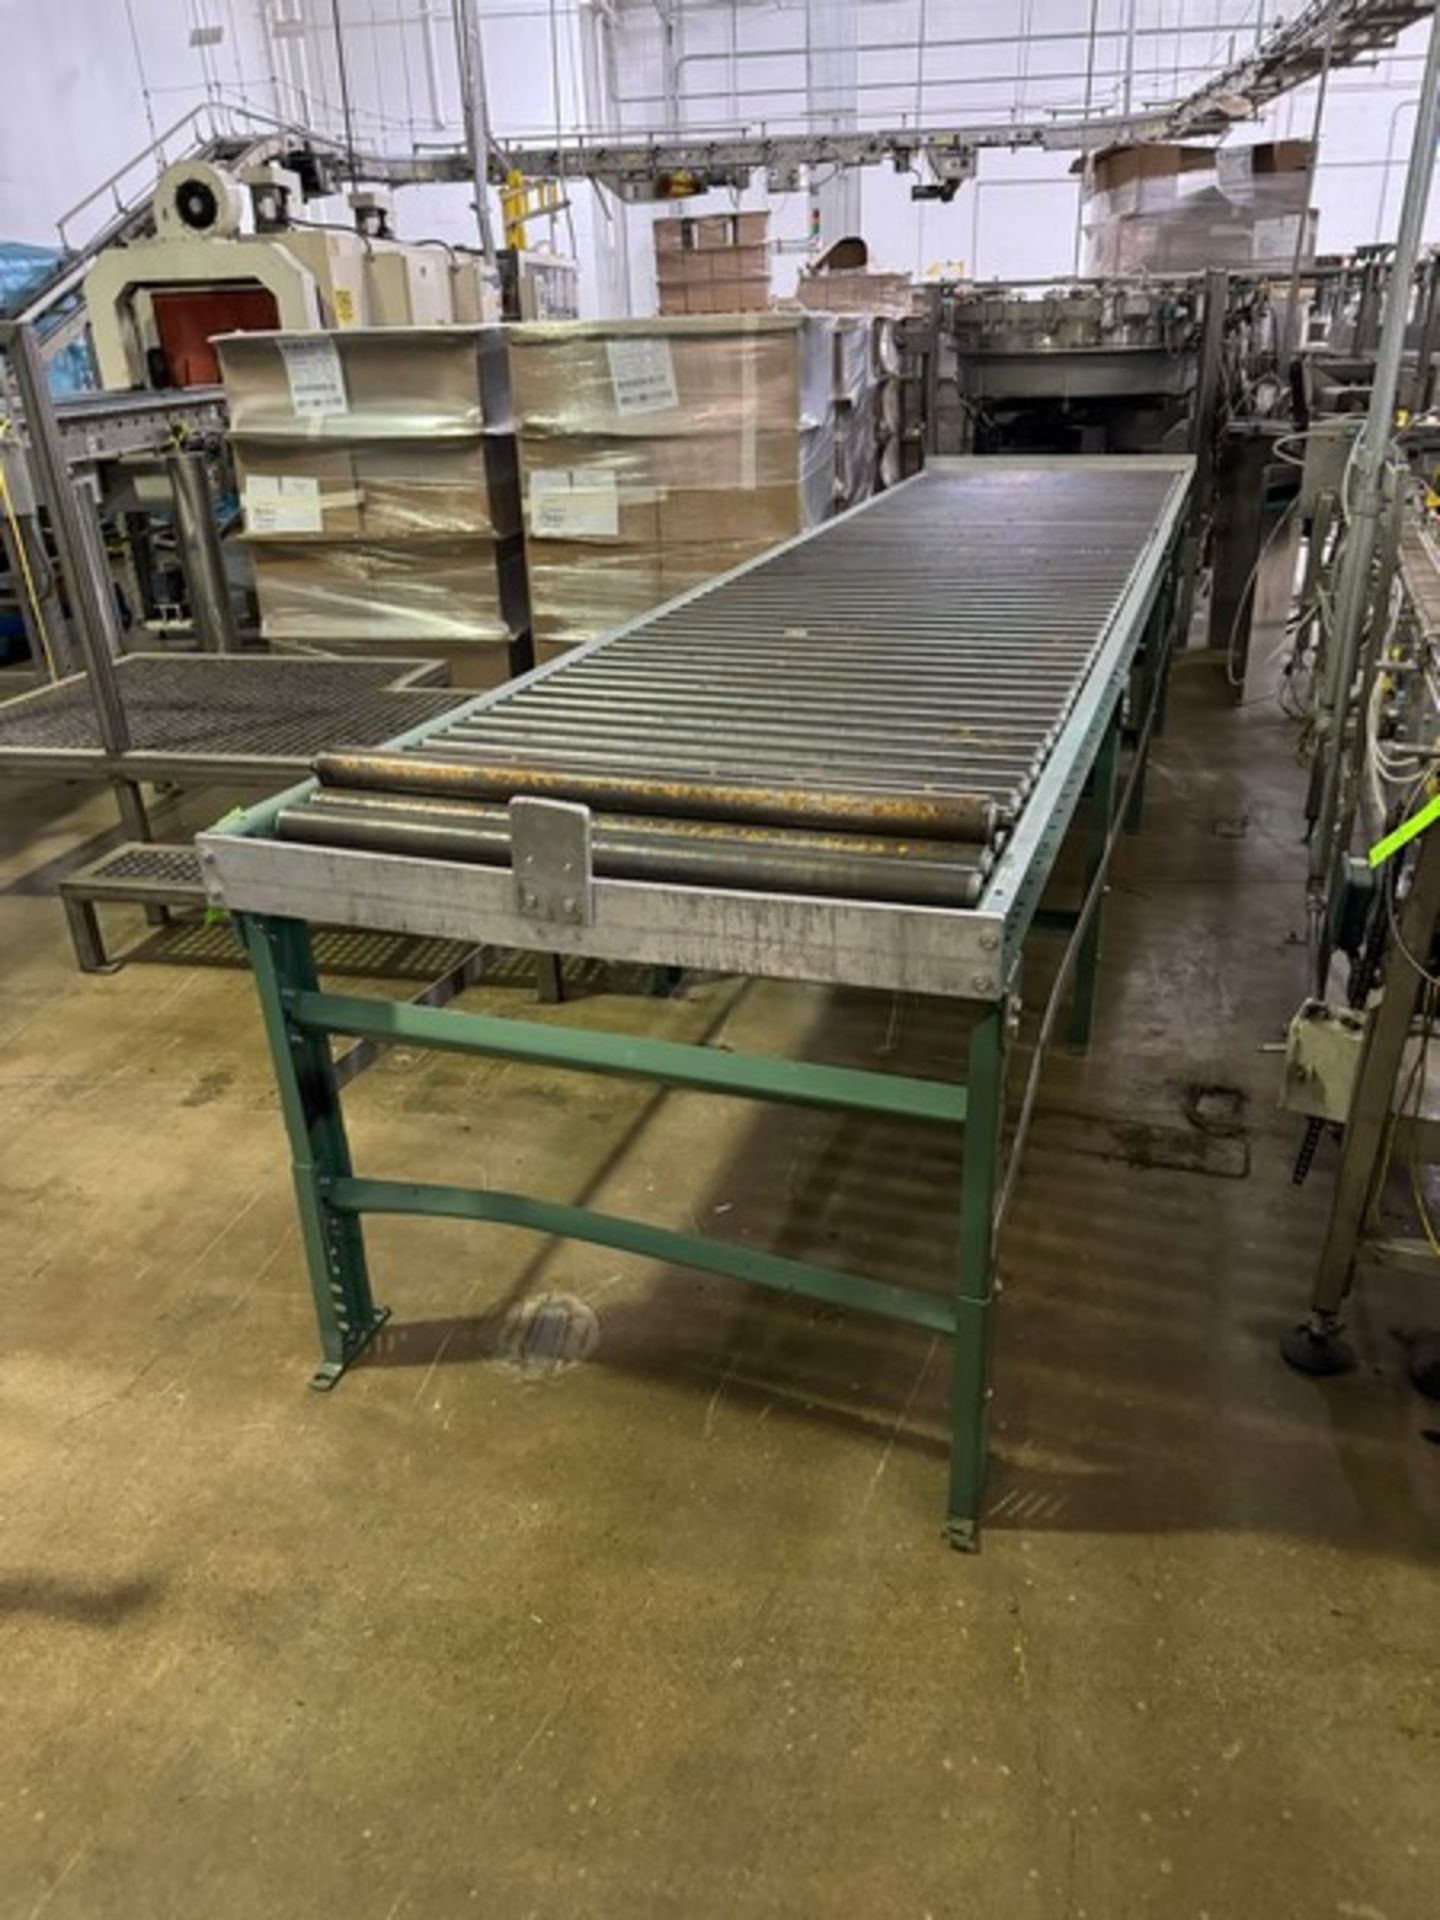 Roach Straight Section of Roller Conveyor, Aprox. 15 ft. L with Aprox. 38” W Rolls, Bed of Rolls - Image 3 of 3